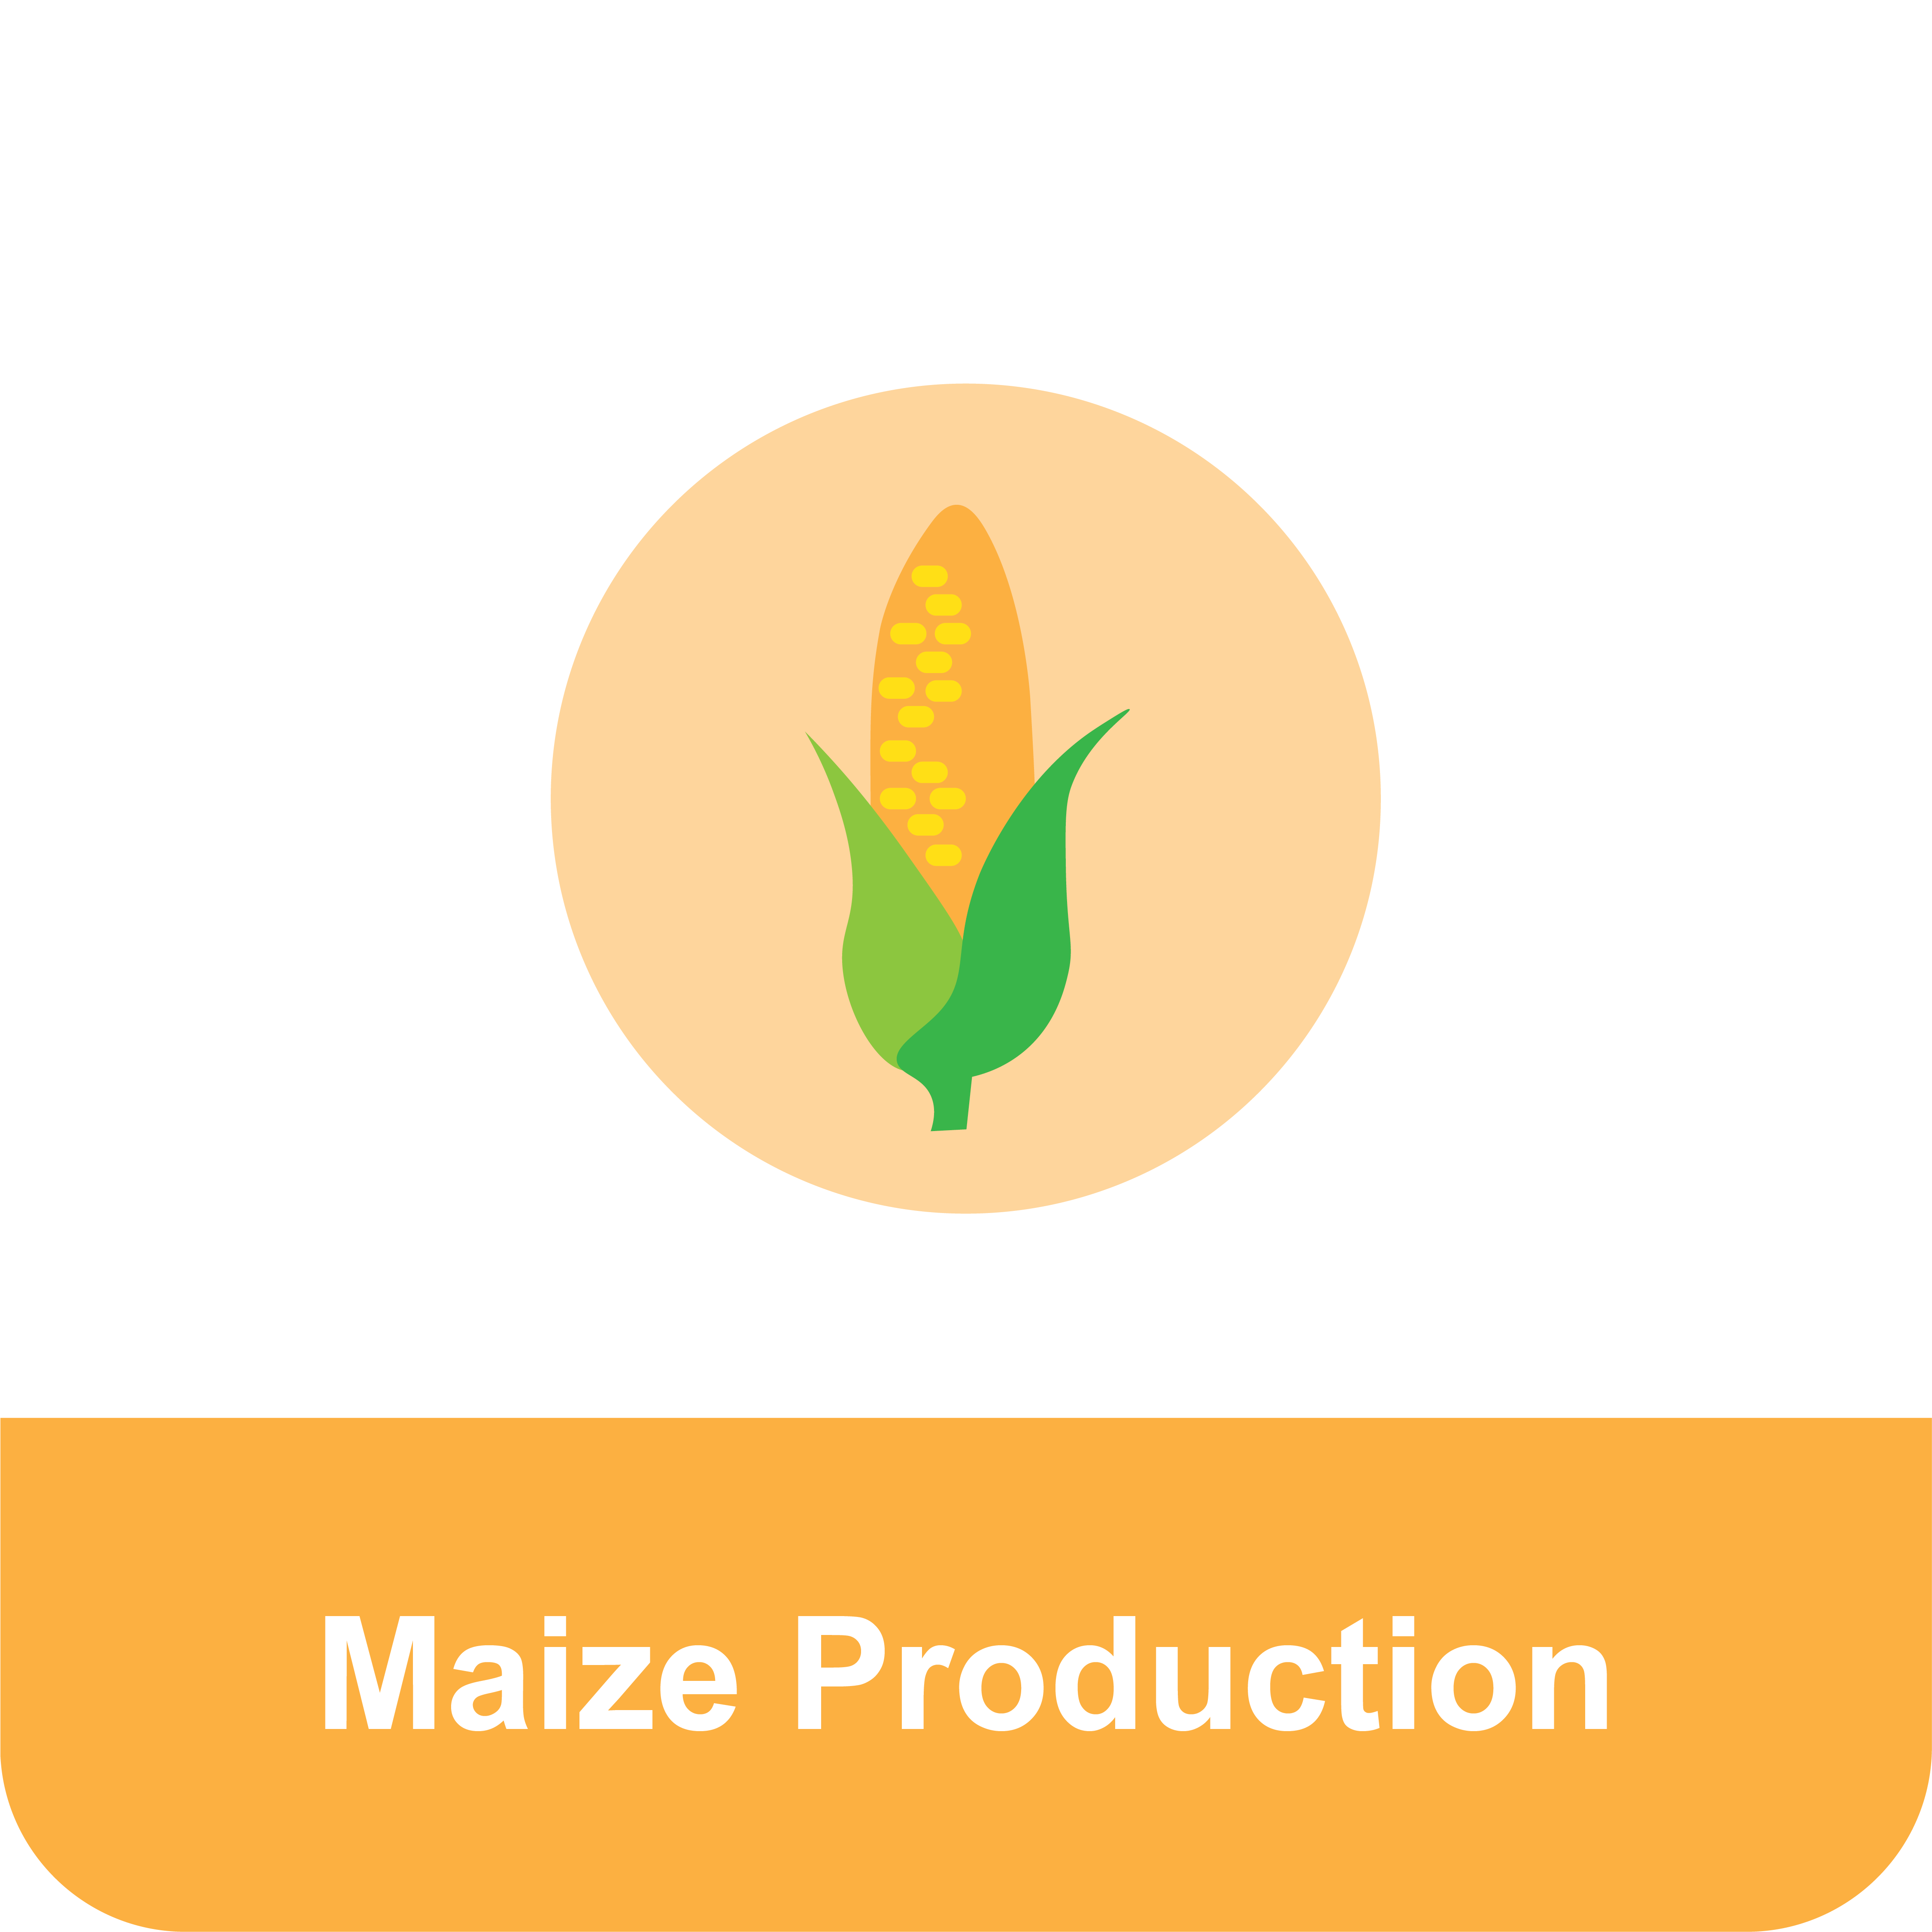 Title that reads "Maize Production" under an icon of an ear of maize.